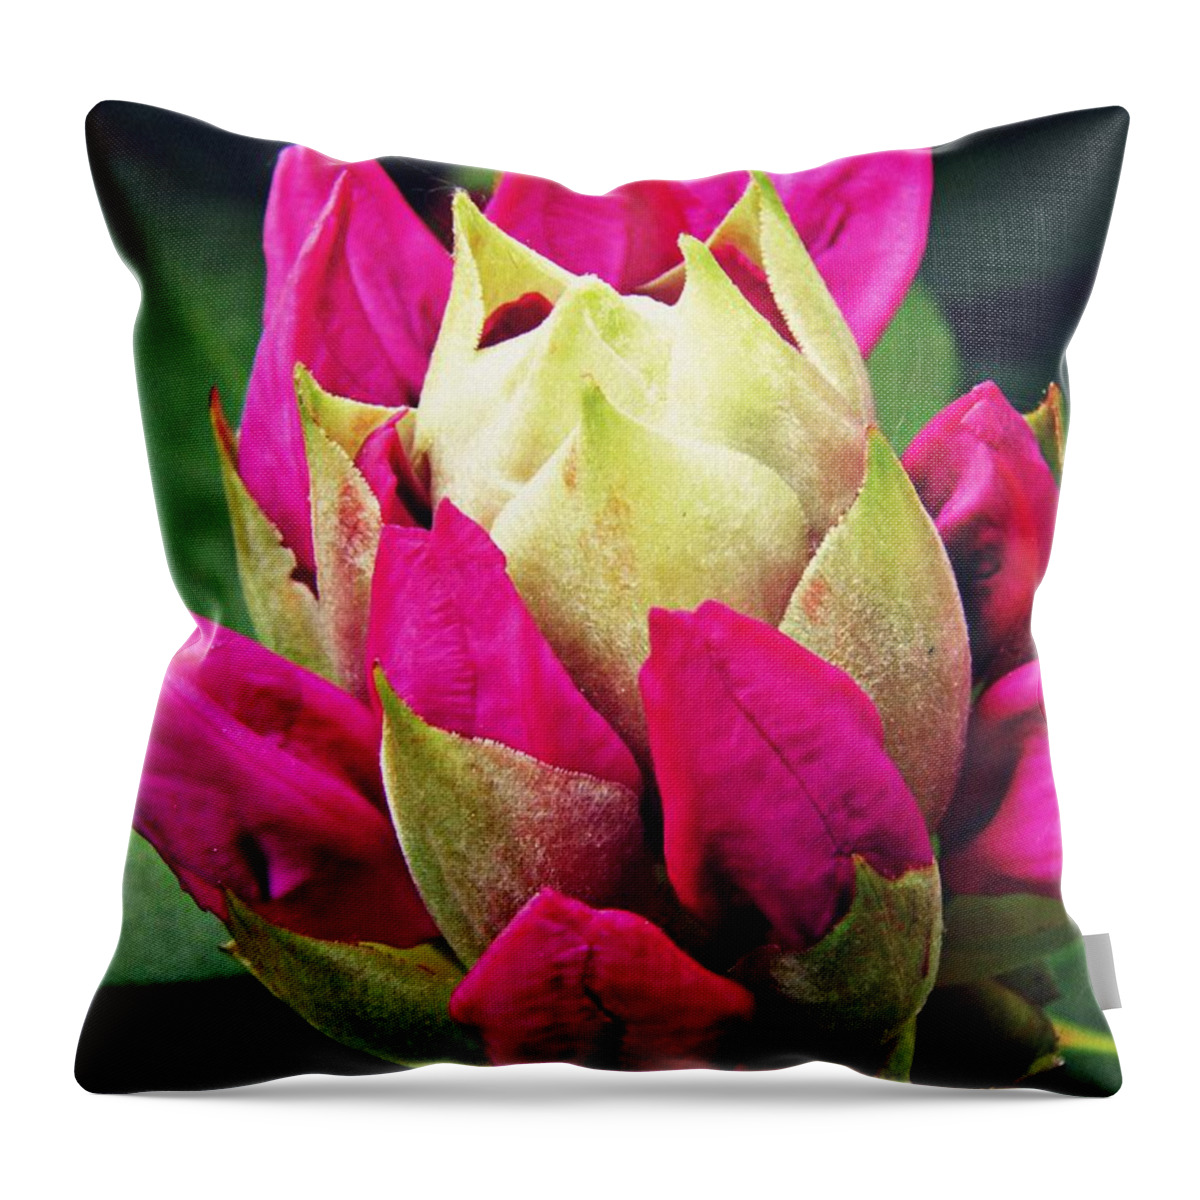 Rhododendron Throw Pillow featuring the photograph Rhododendron Velvet  by Sarah Loft